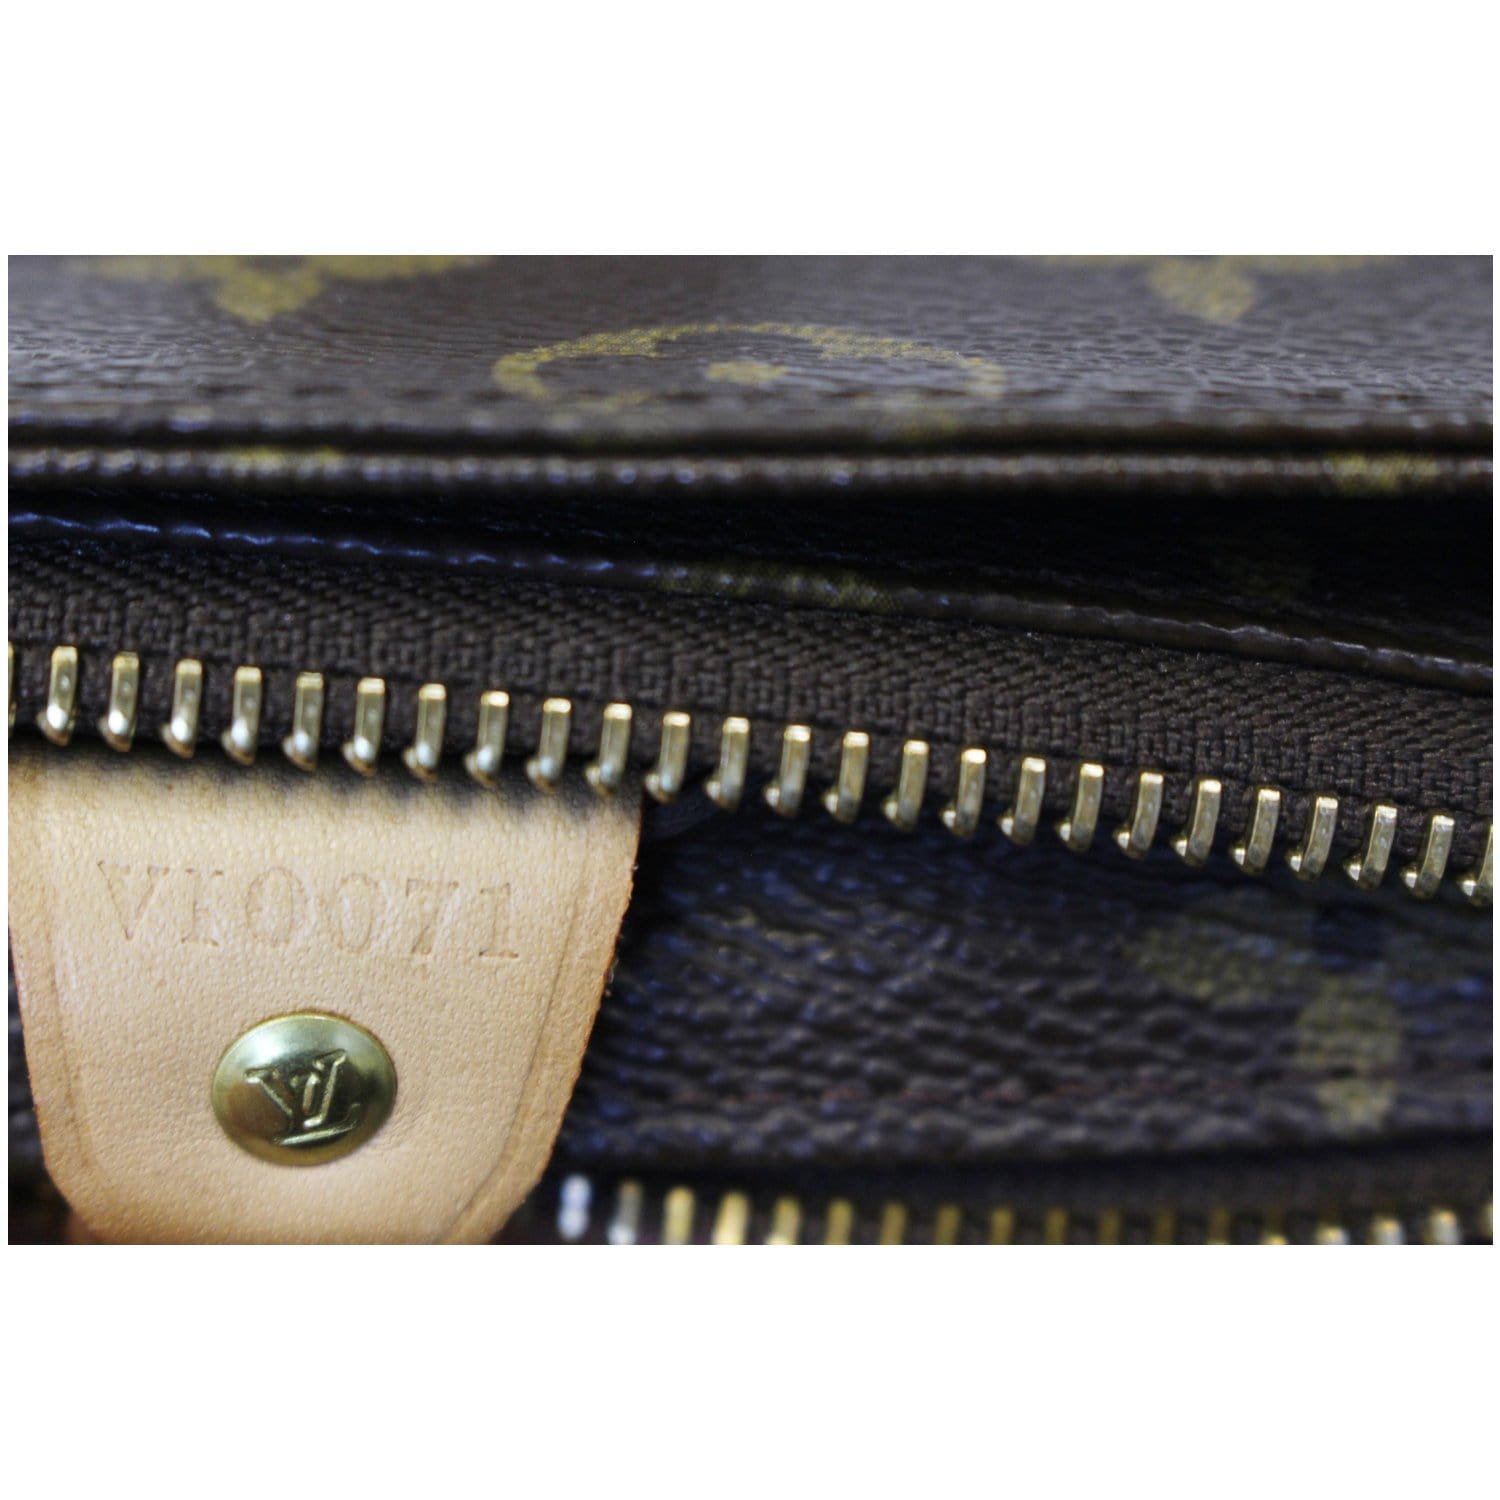 Louis Vuitton Cabas Piano #luxury #highend #resell #louisvuitton